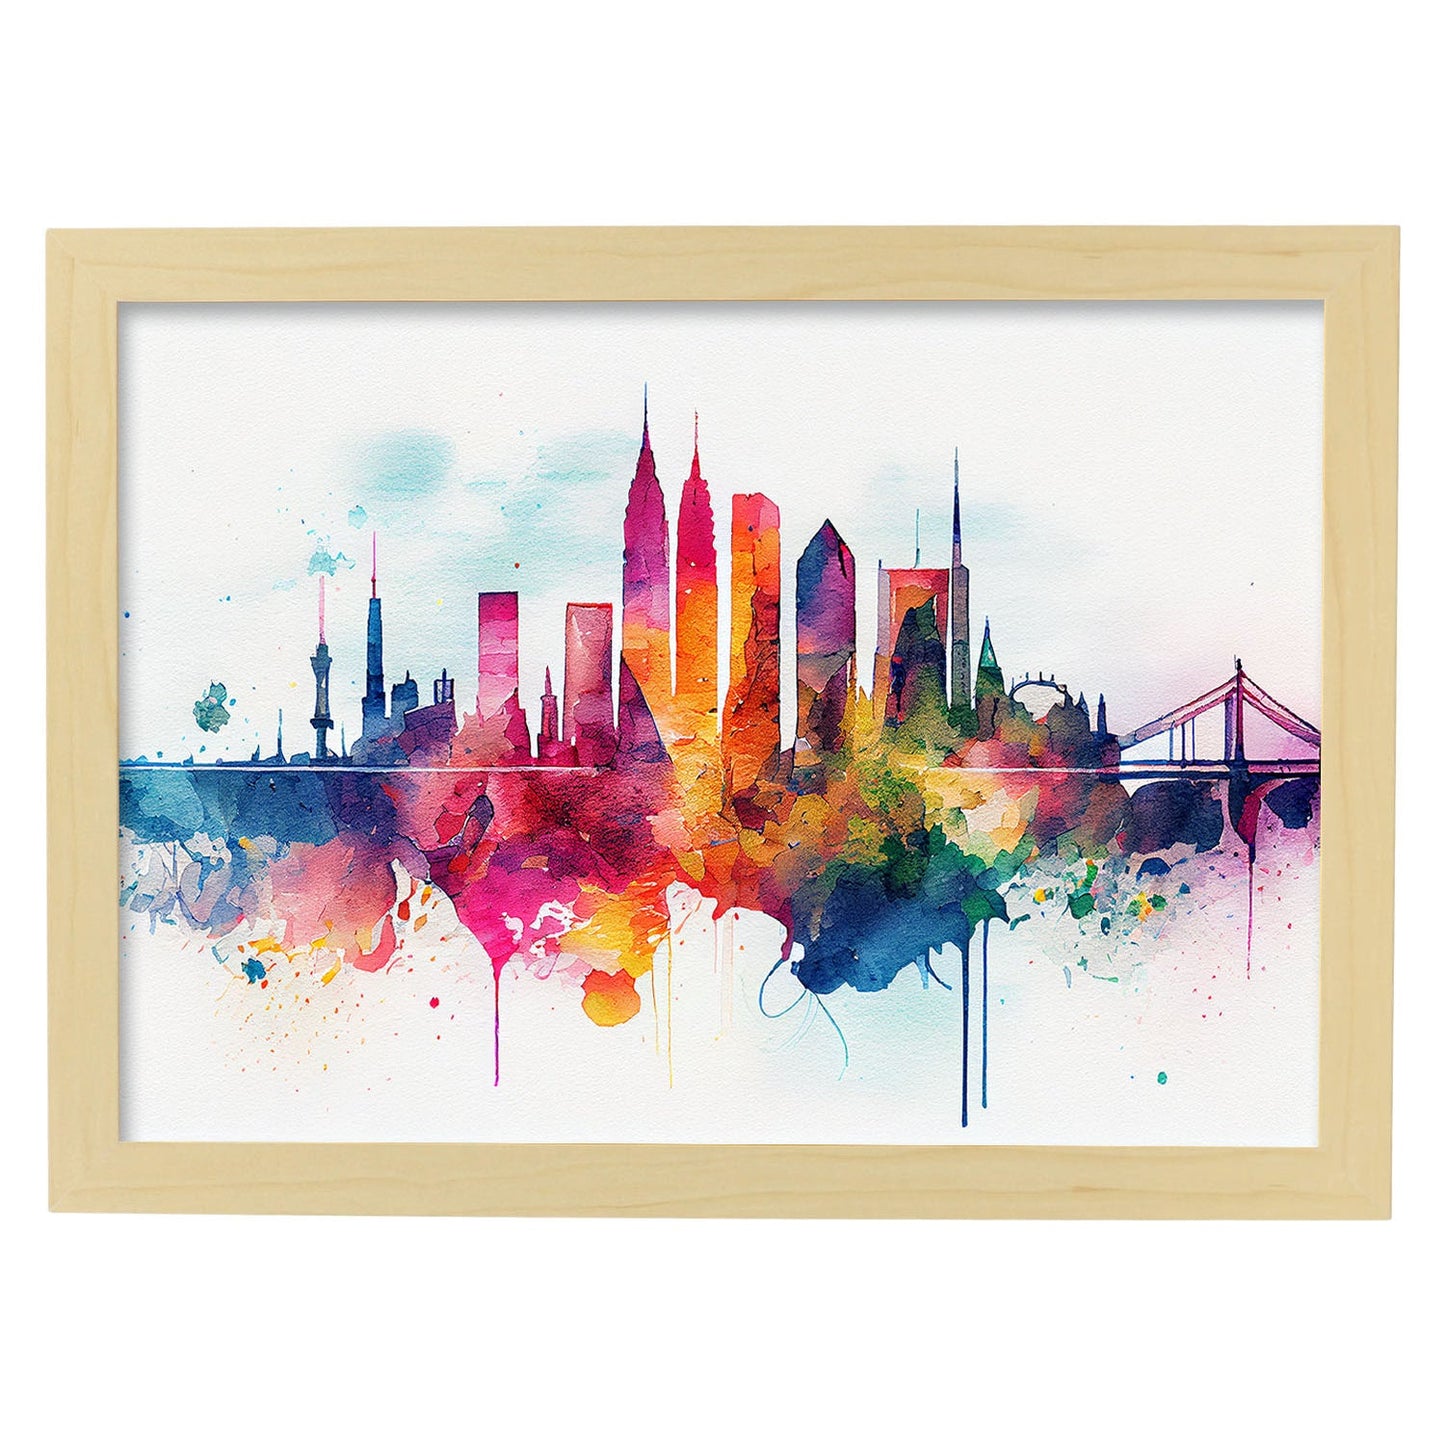 Nacnic watercolor of a skyline of the city of Frankfurt. Aesthetic Wall Art Prints for Bedroom or Living Room Design.-Artwork-Nacnic-A4-Marco Madera Clara-Nacnic Estudio SL